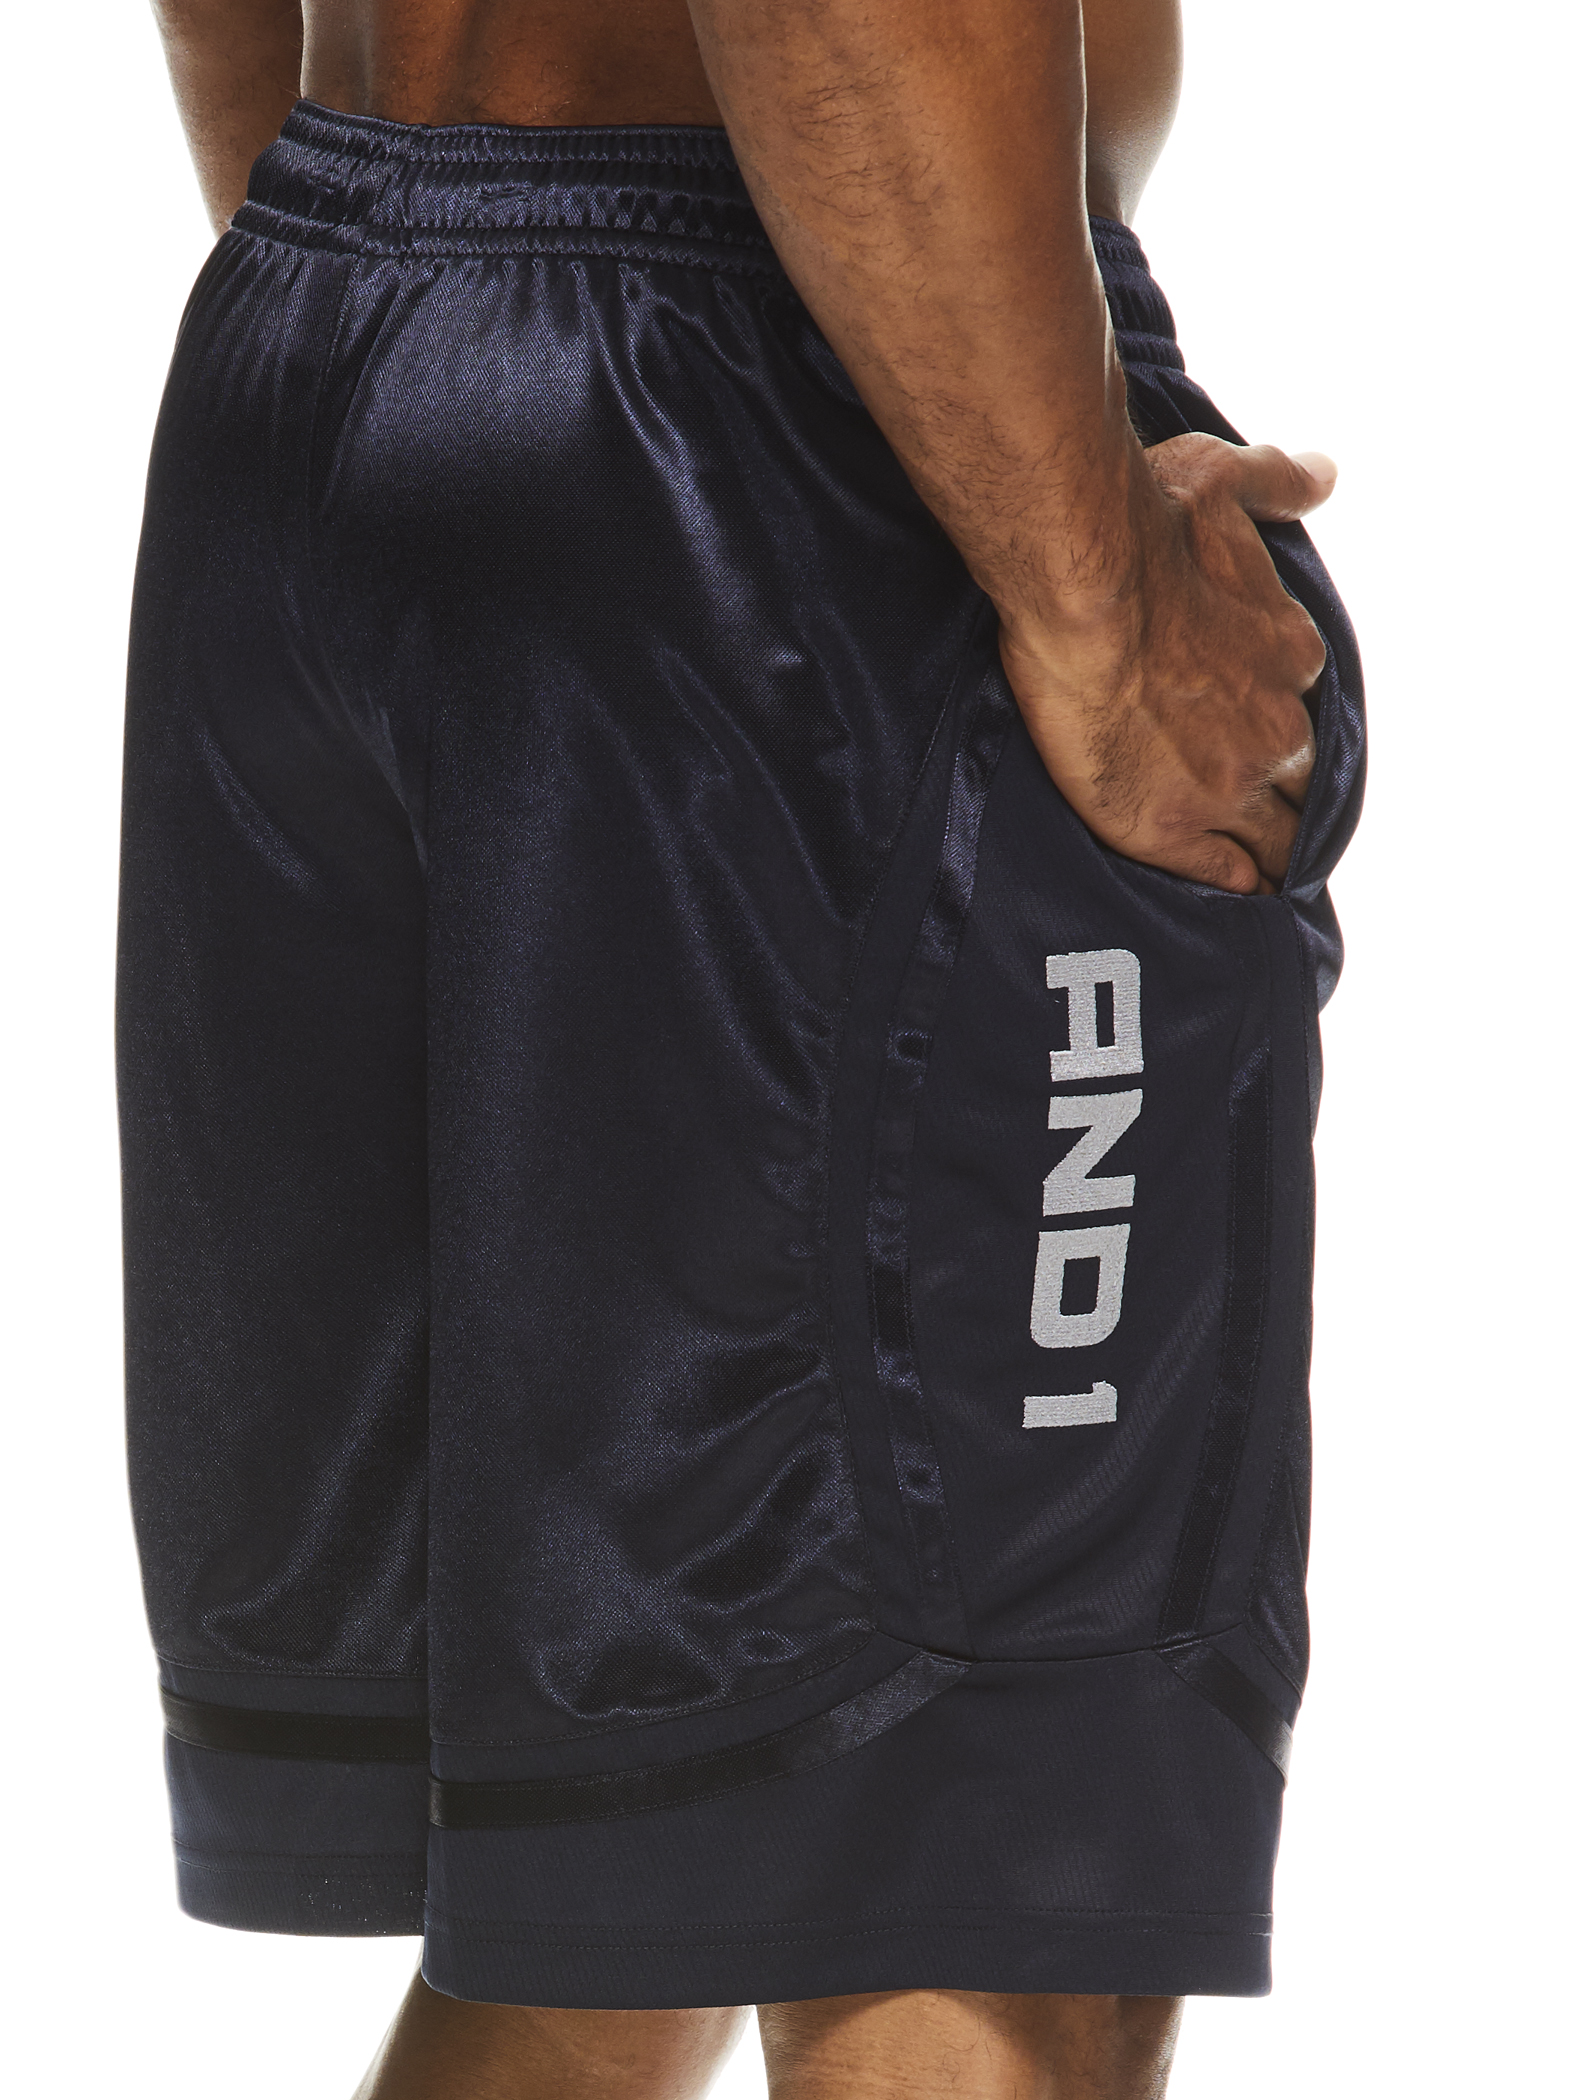 AND1 Men's and Big Men's Active Core 11" Home Court Basketball Shorts, Sizes S-5XL - image 5 of 5